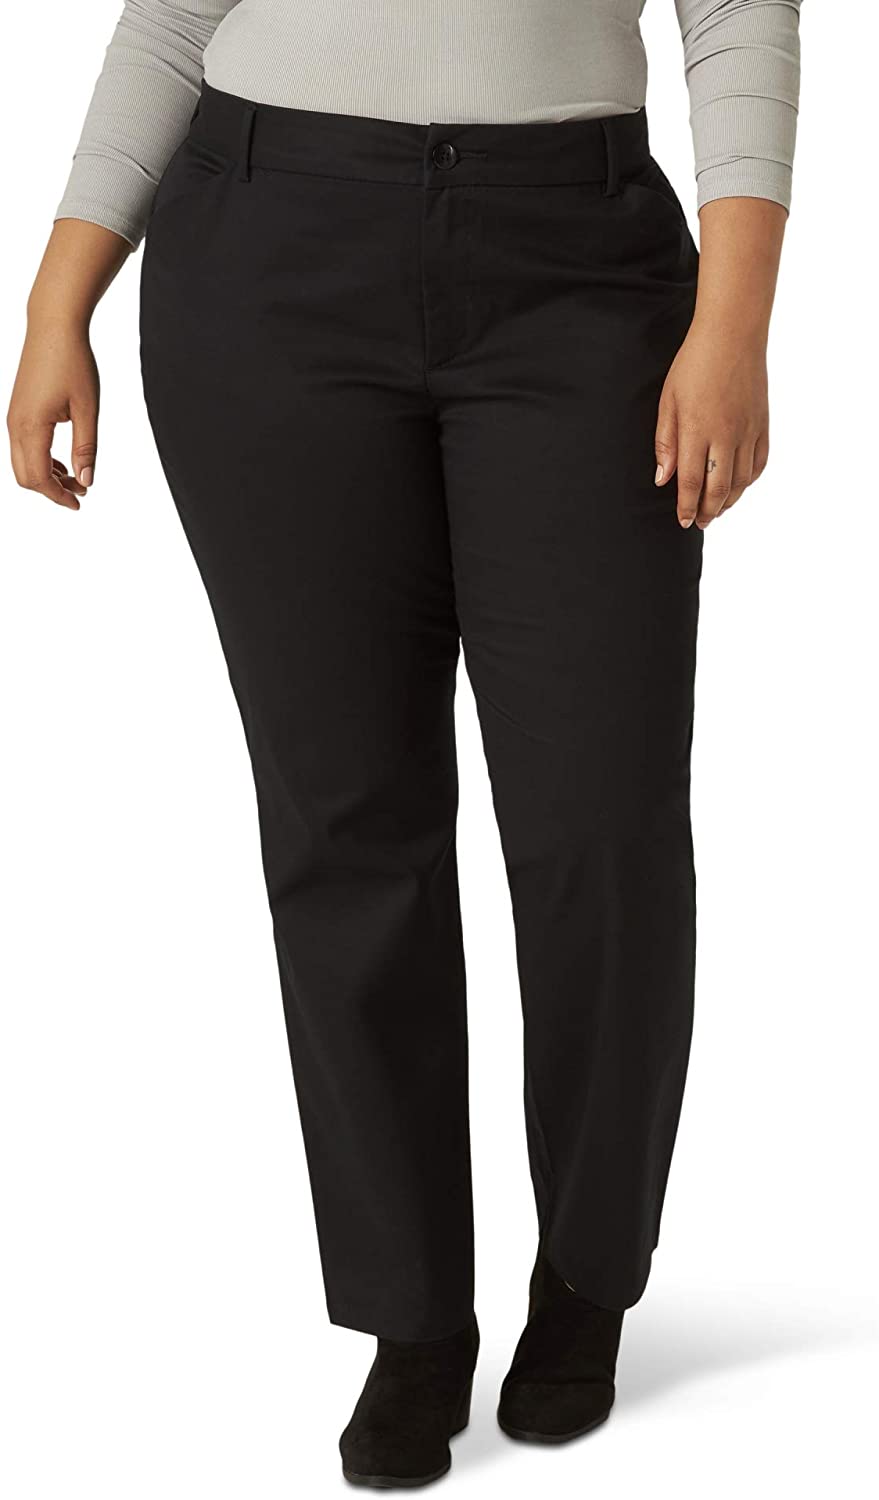 Lee Women's Plus Size Wrinkle Free Relaxed Fit Straight Leg Pant | eBay